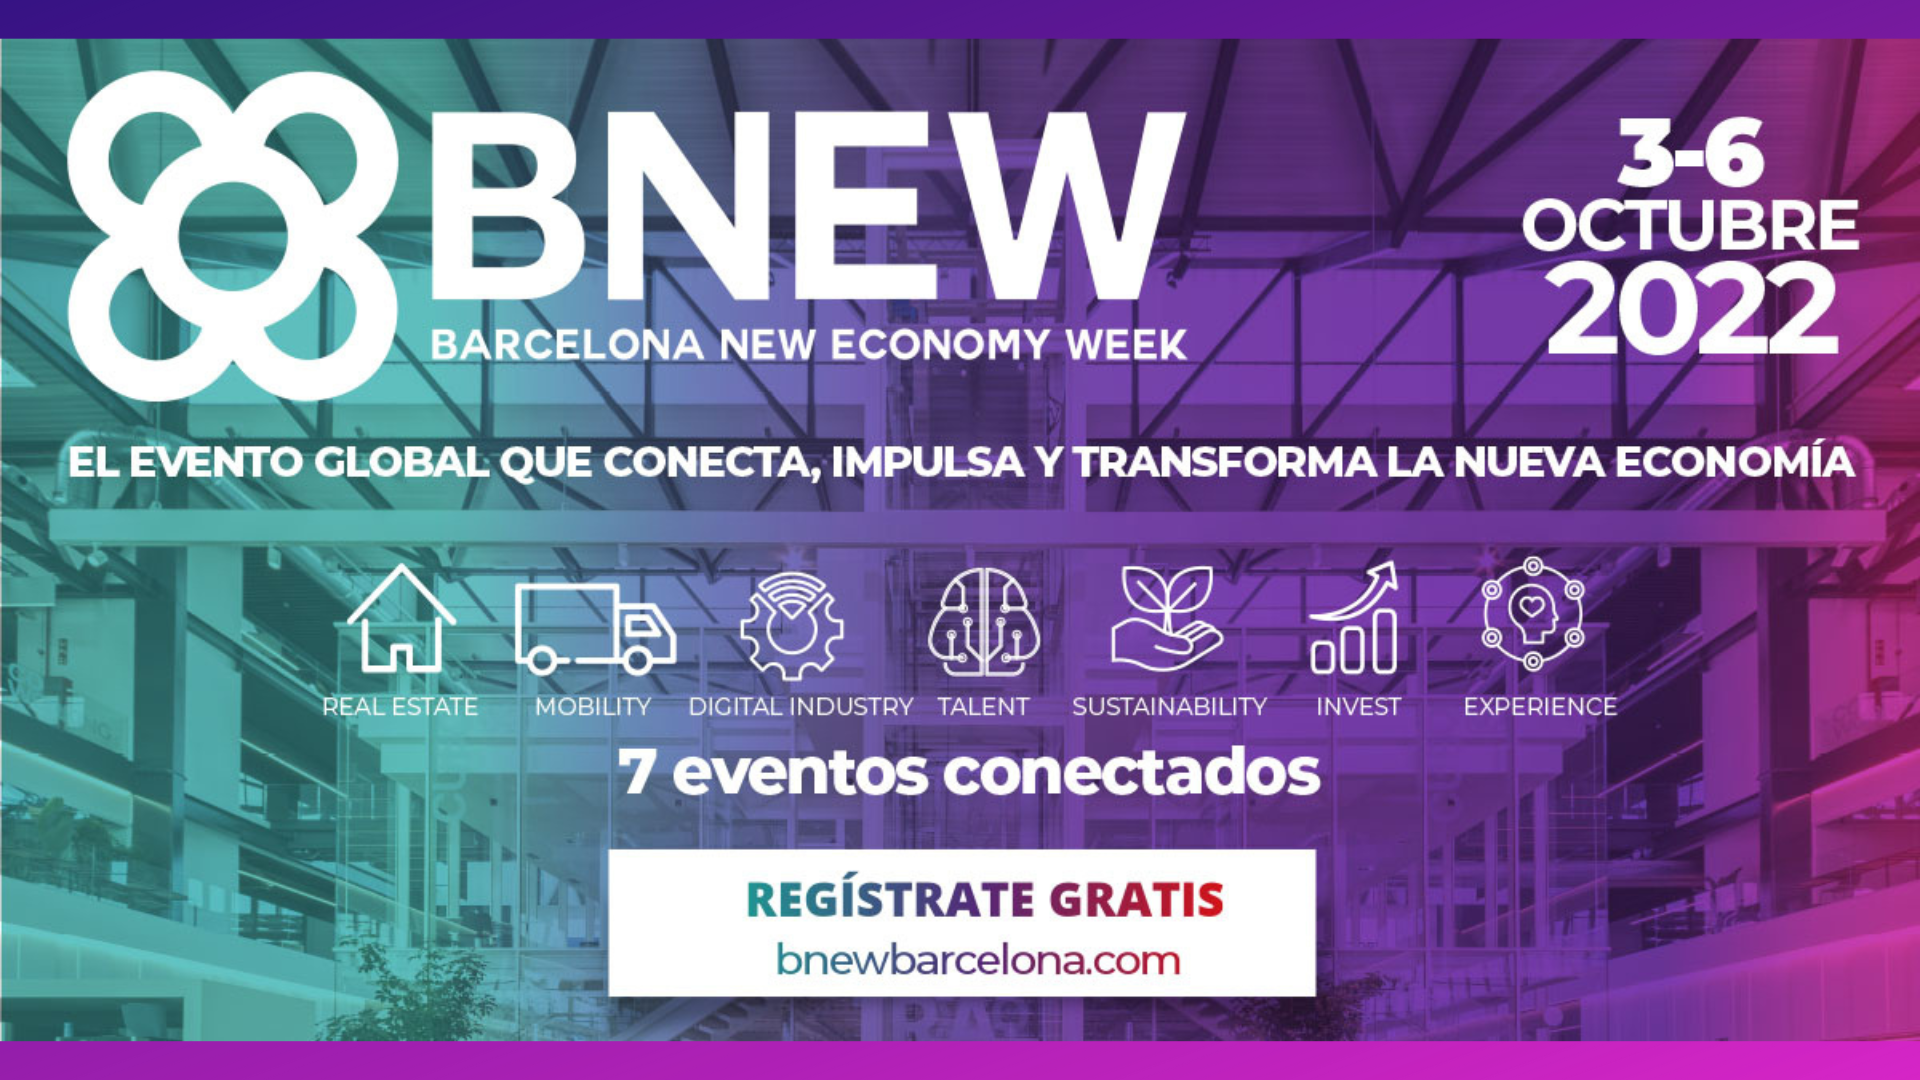 Join the BNEW conference of DFactory together with BHH from October 3rd to 6th